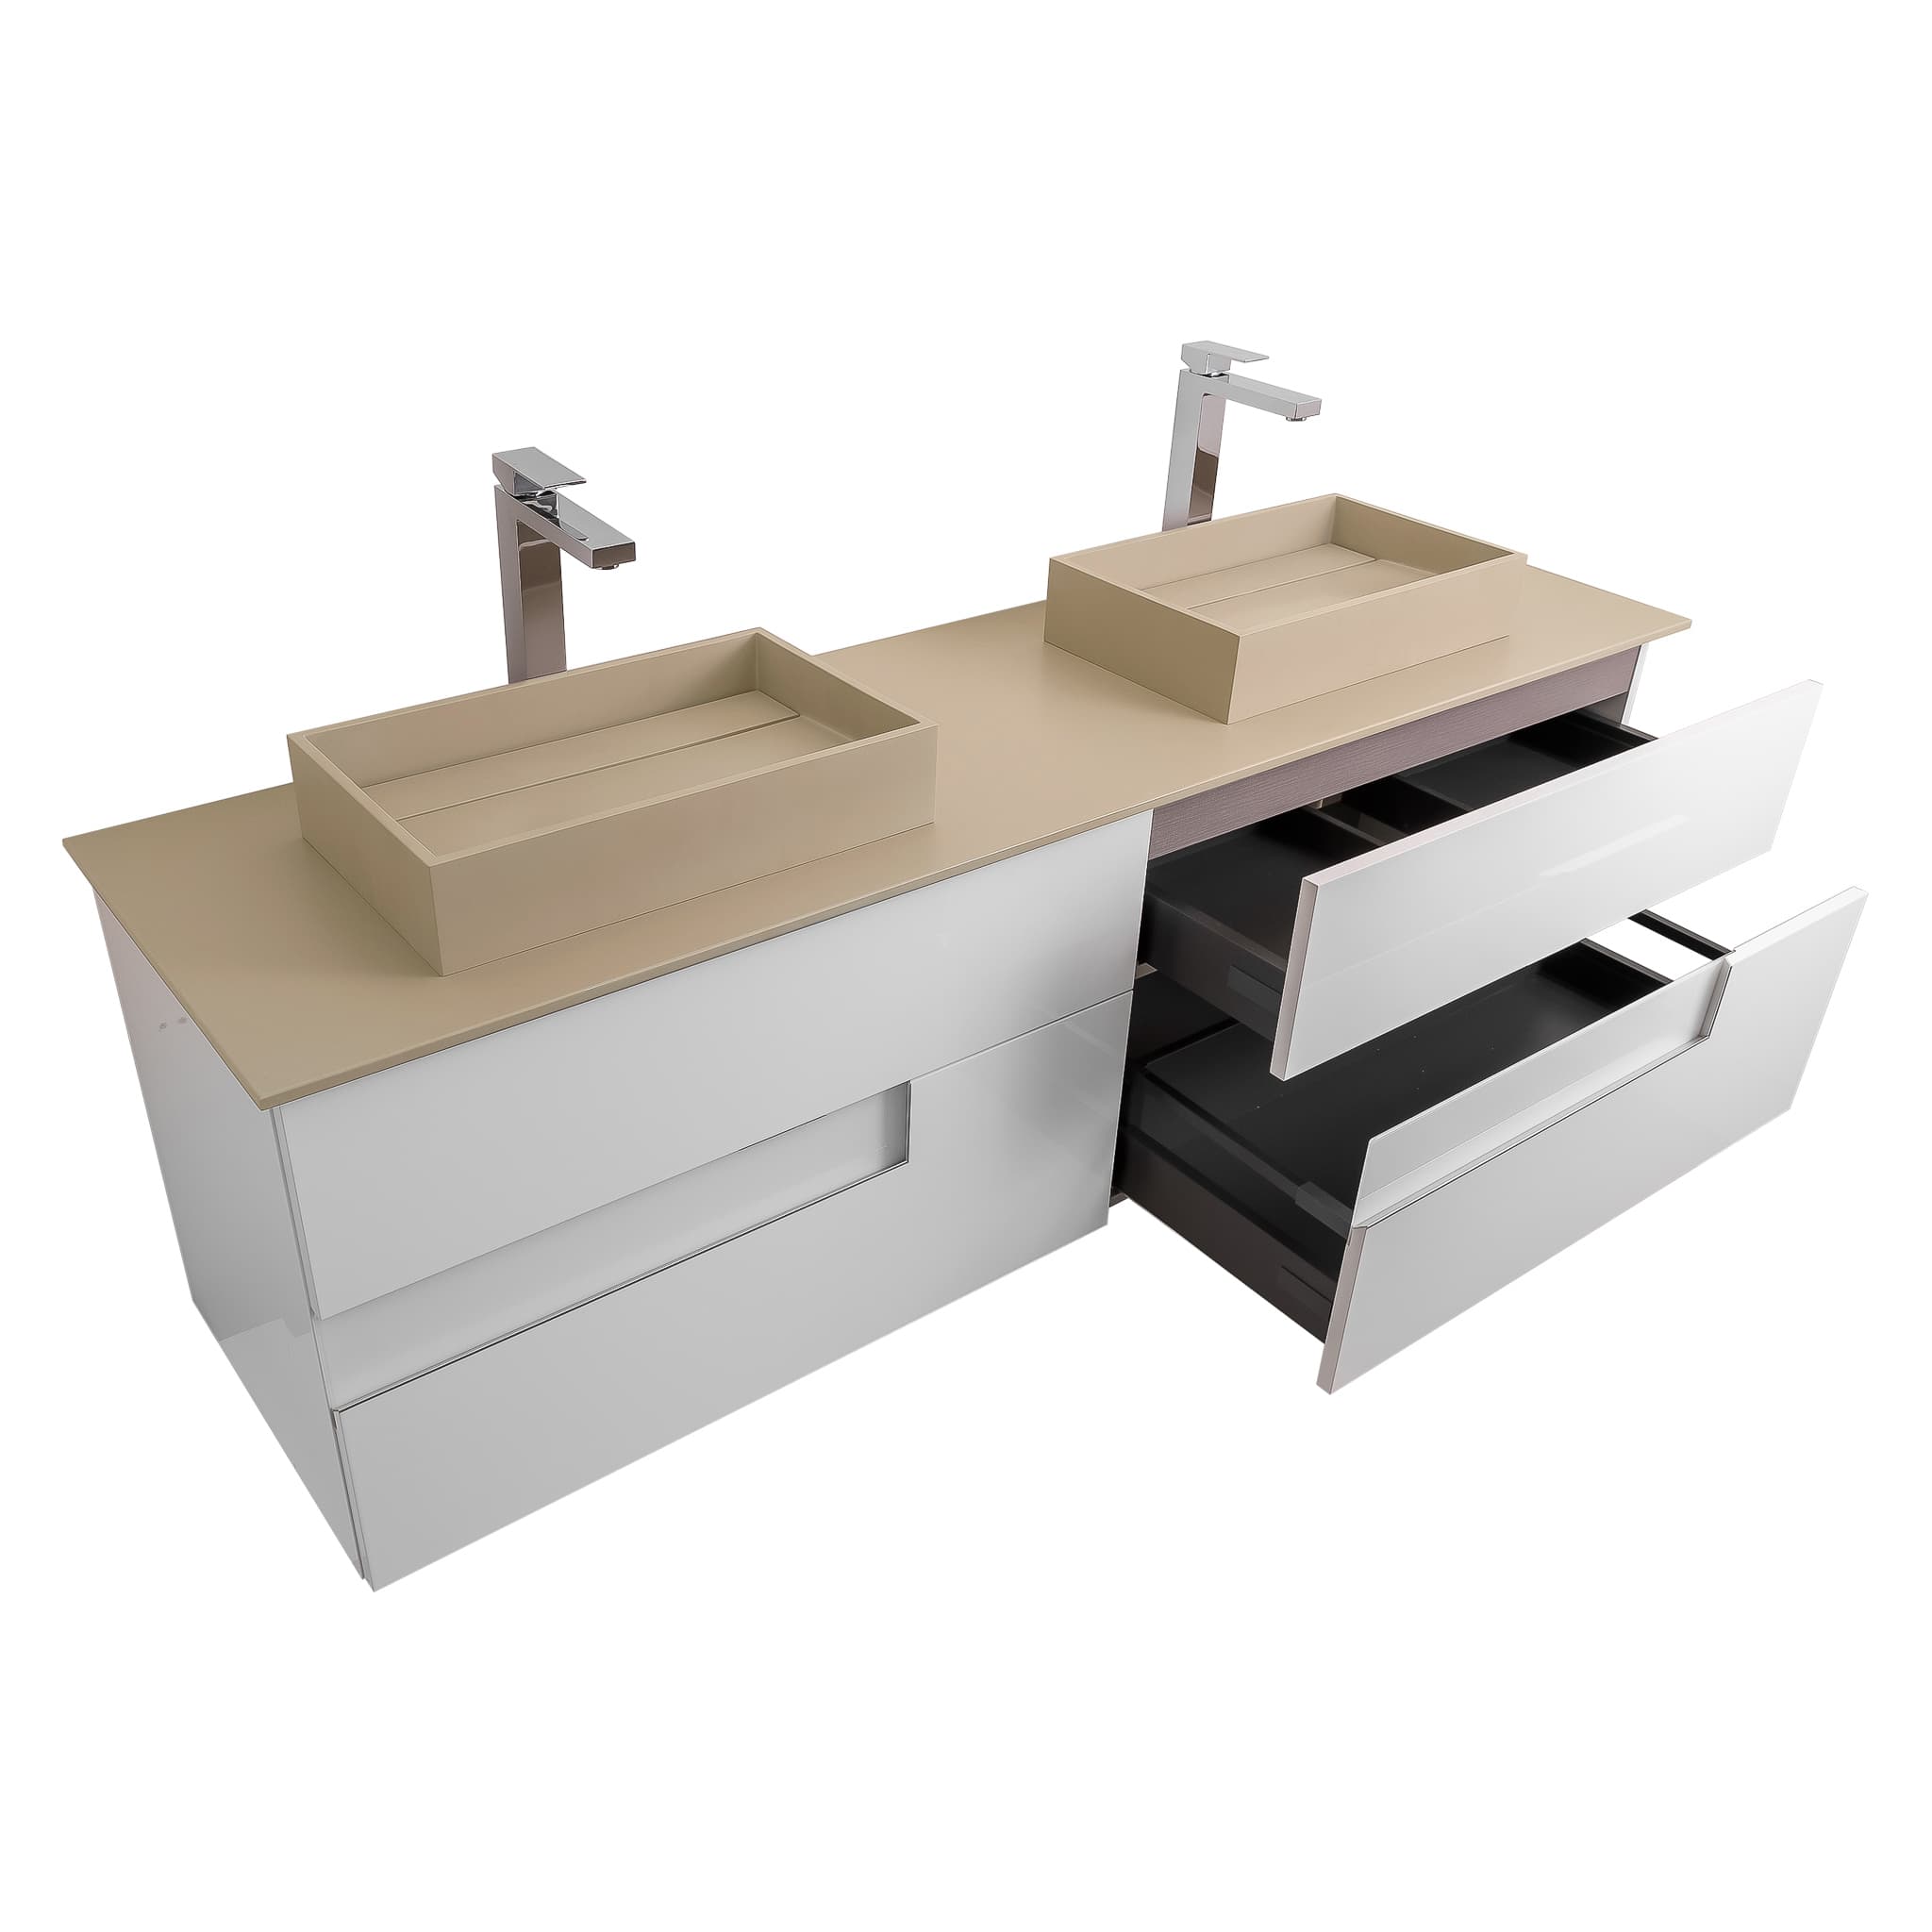 Vision 63 White High Gloss Cabinet, Solid Surface Flat Taupe Counter And Two Infinity Square Solid Surface Taupe Basin 1329, Wall Mounted Modern Vanity Set